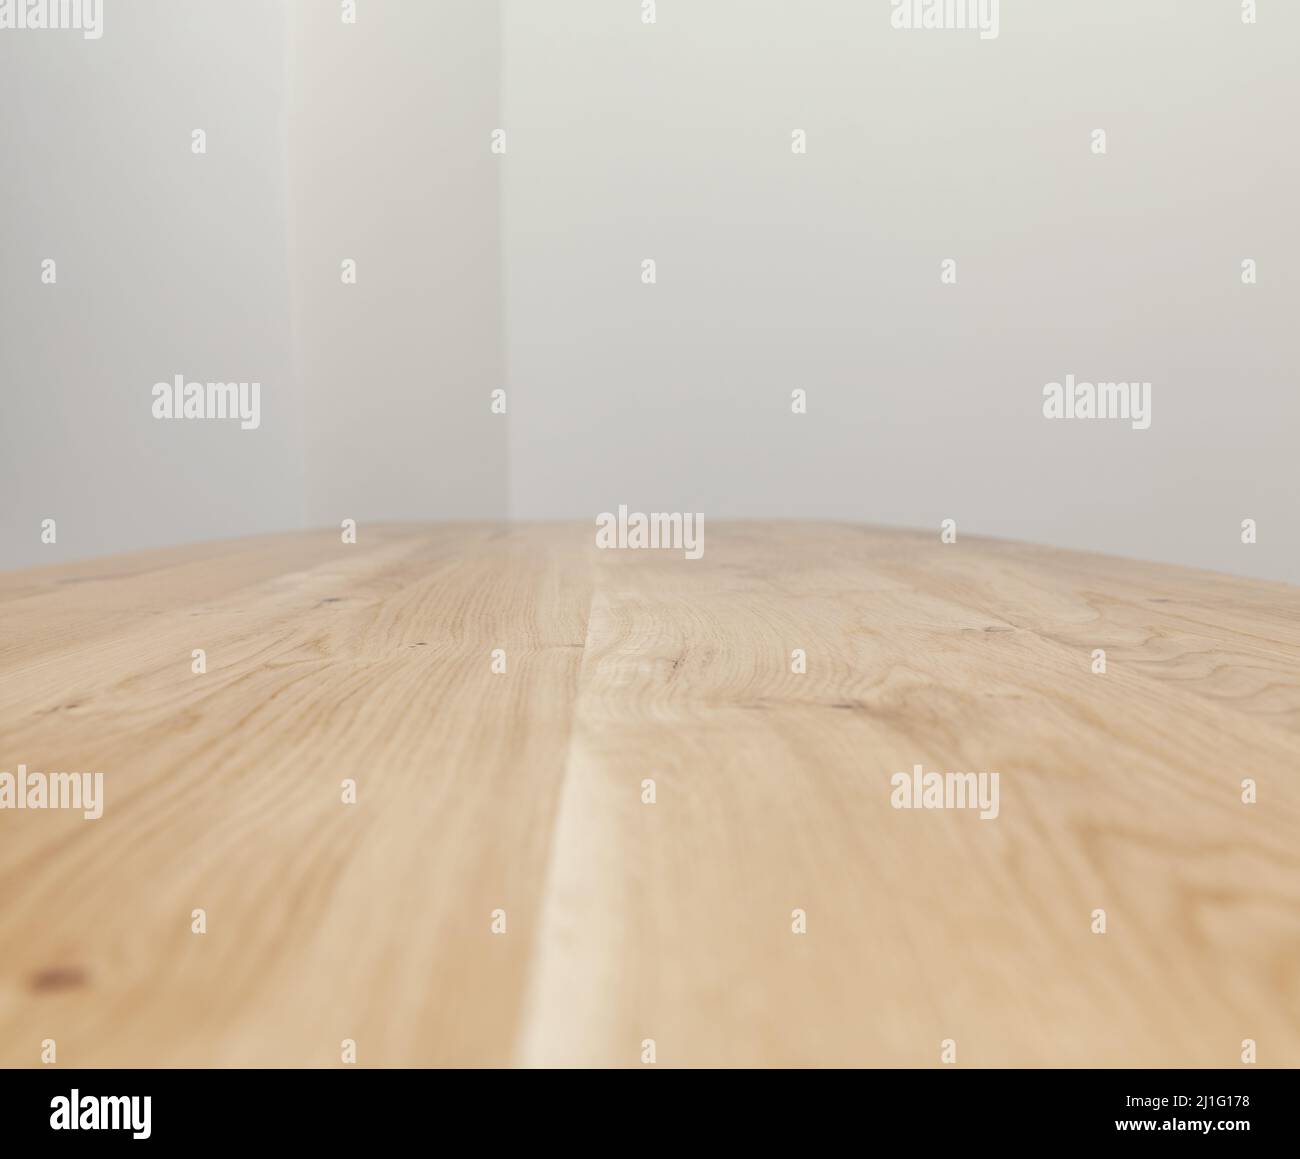 abstract wooden background, close up Stock Photo